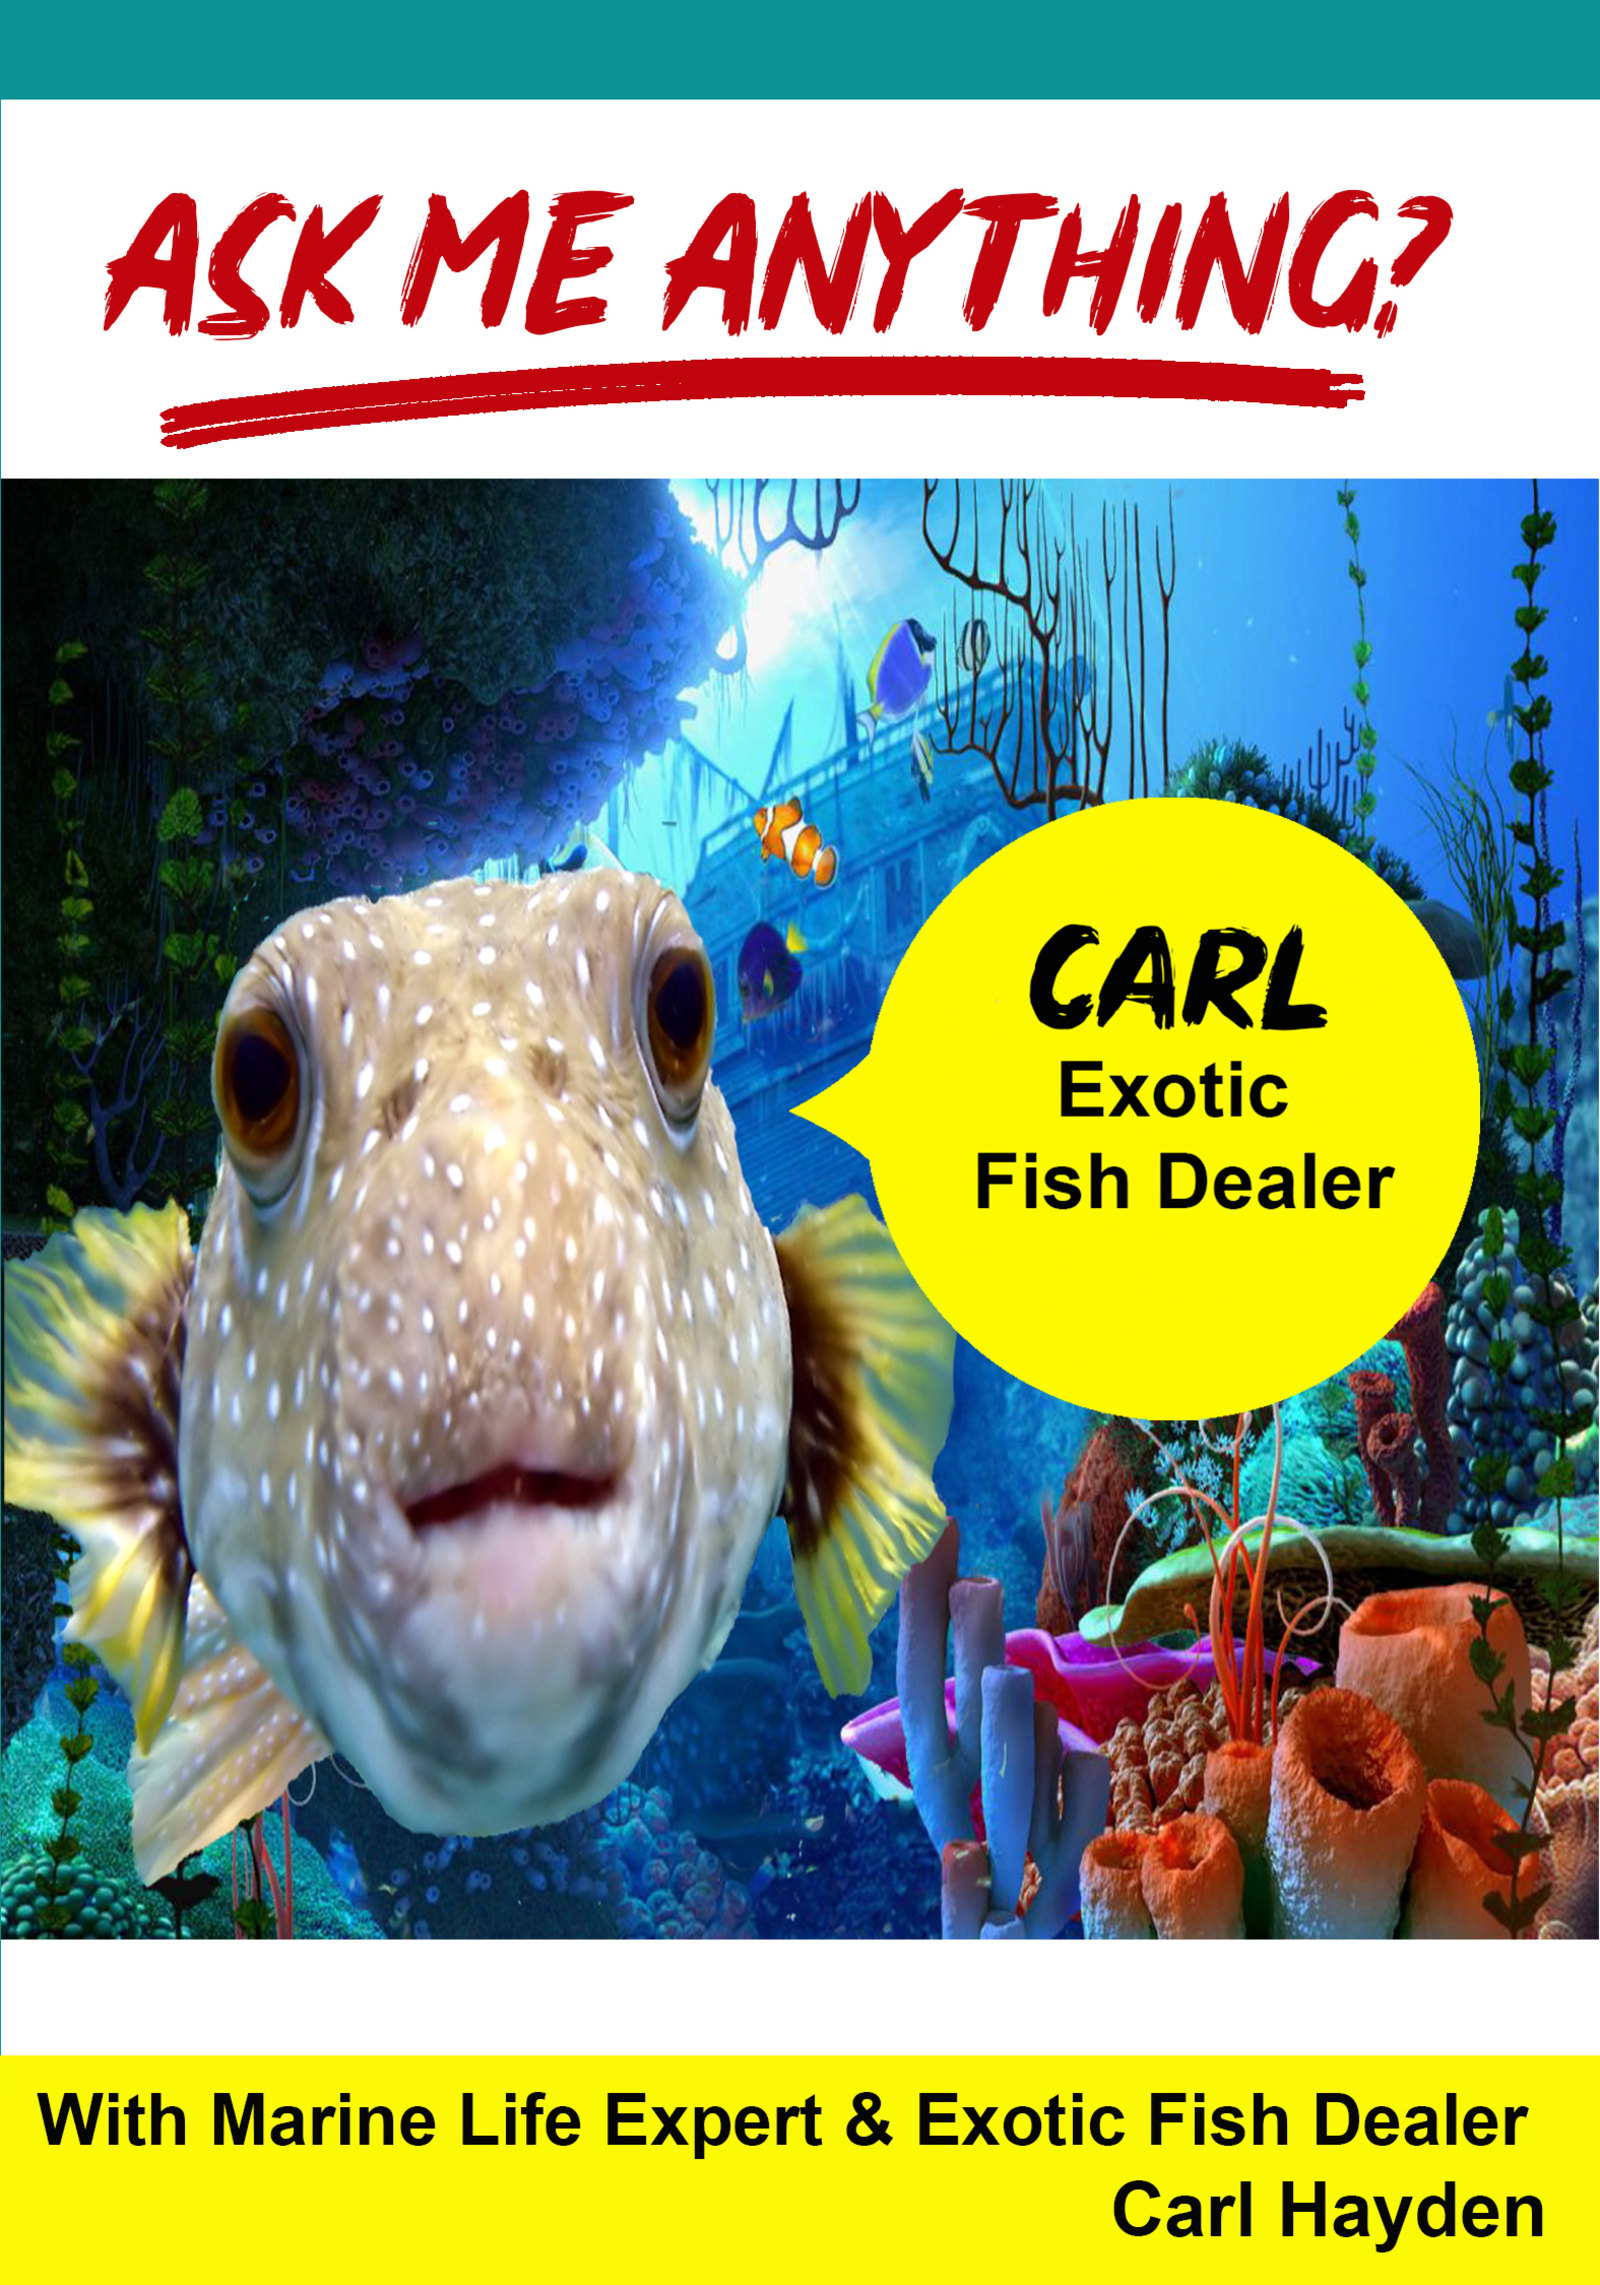 K4840 - Ask Me Anything about being an Exotic Fish Dealer with Carl Hayden